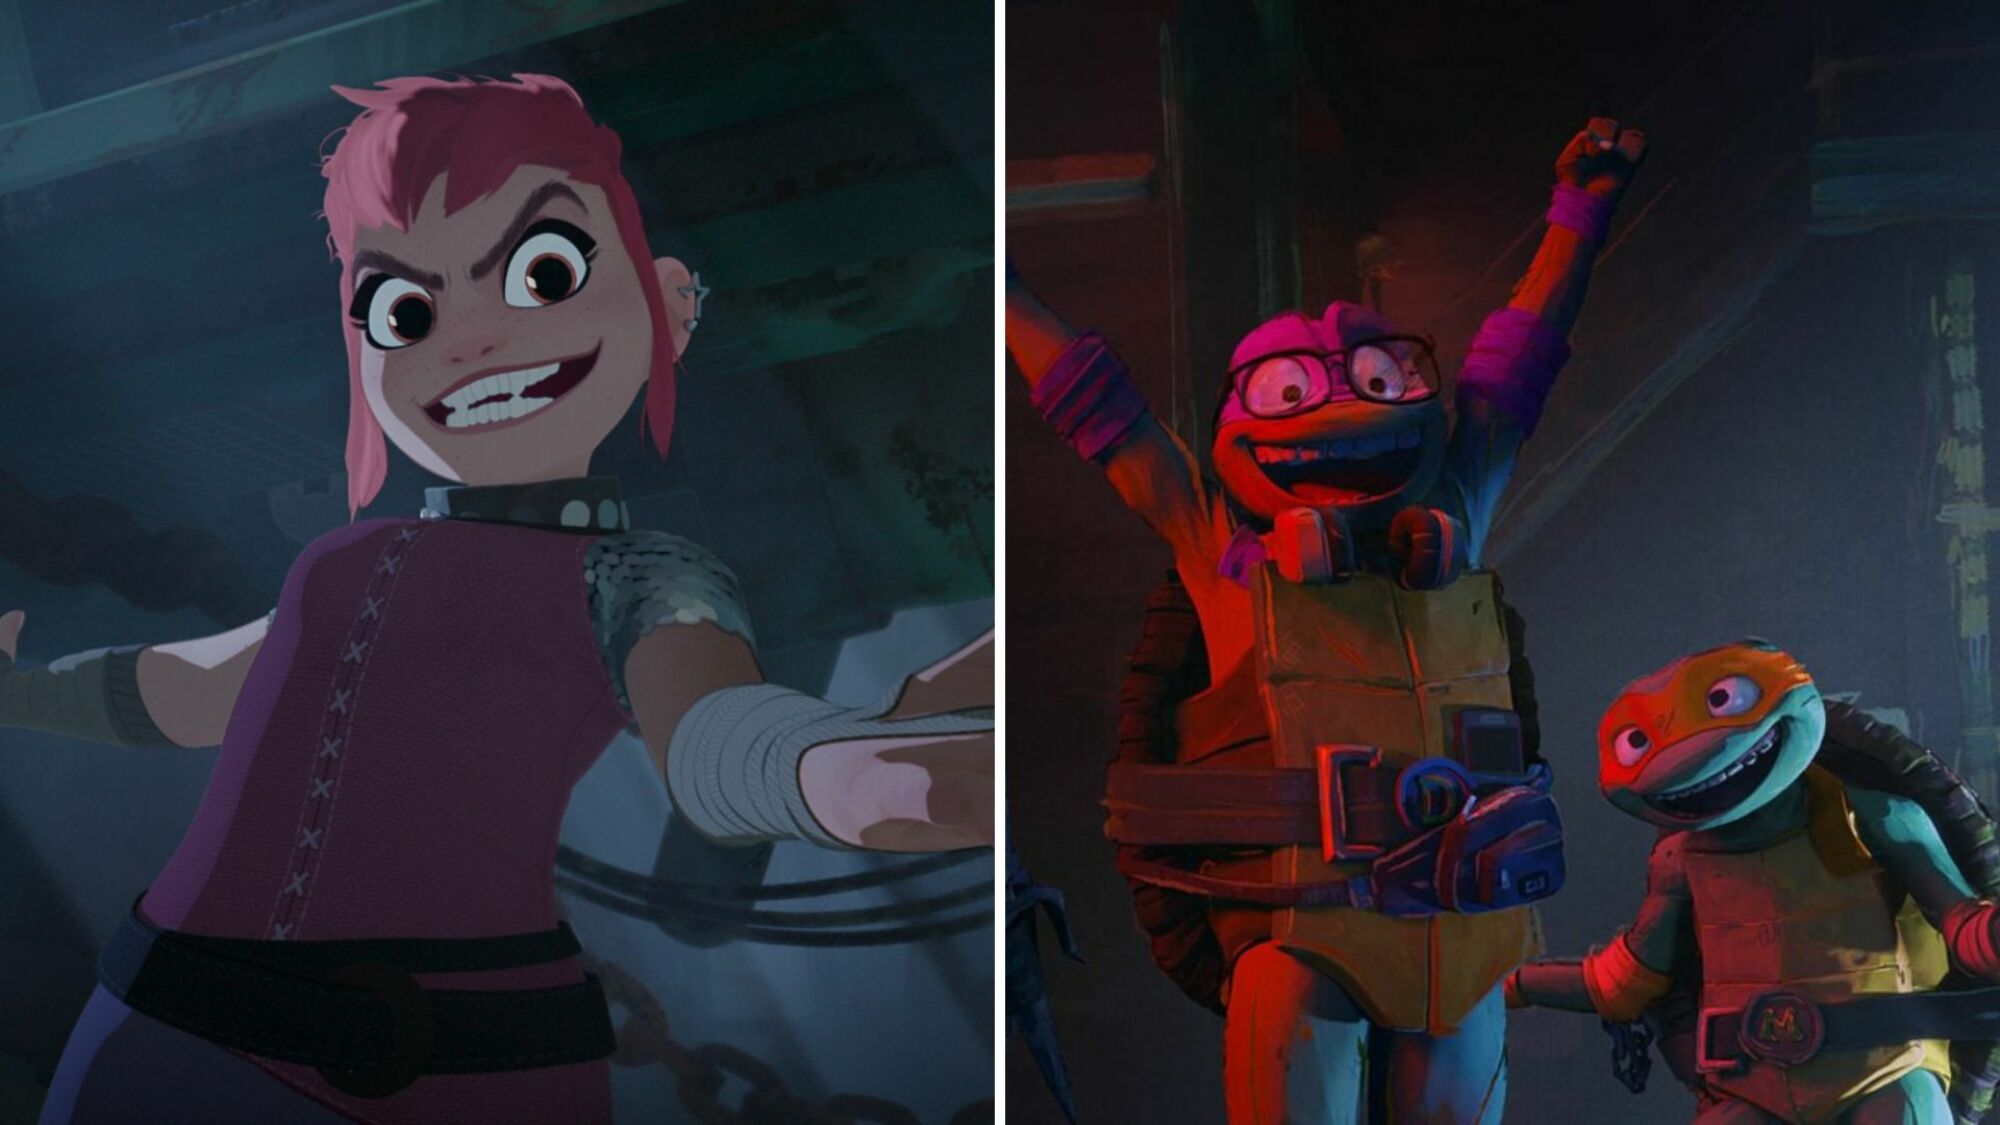 Two images: A young girl with short pink hair extends her hands with a menacing grin, and two very excited Teenage Mutant Ninja Turtles.